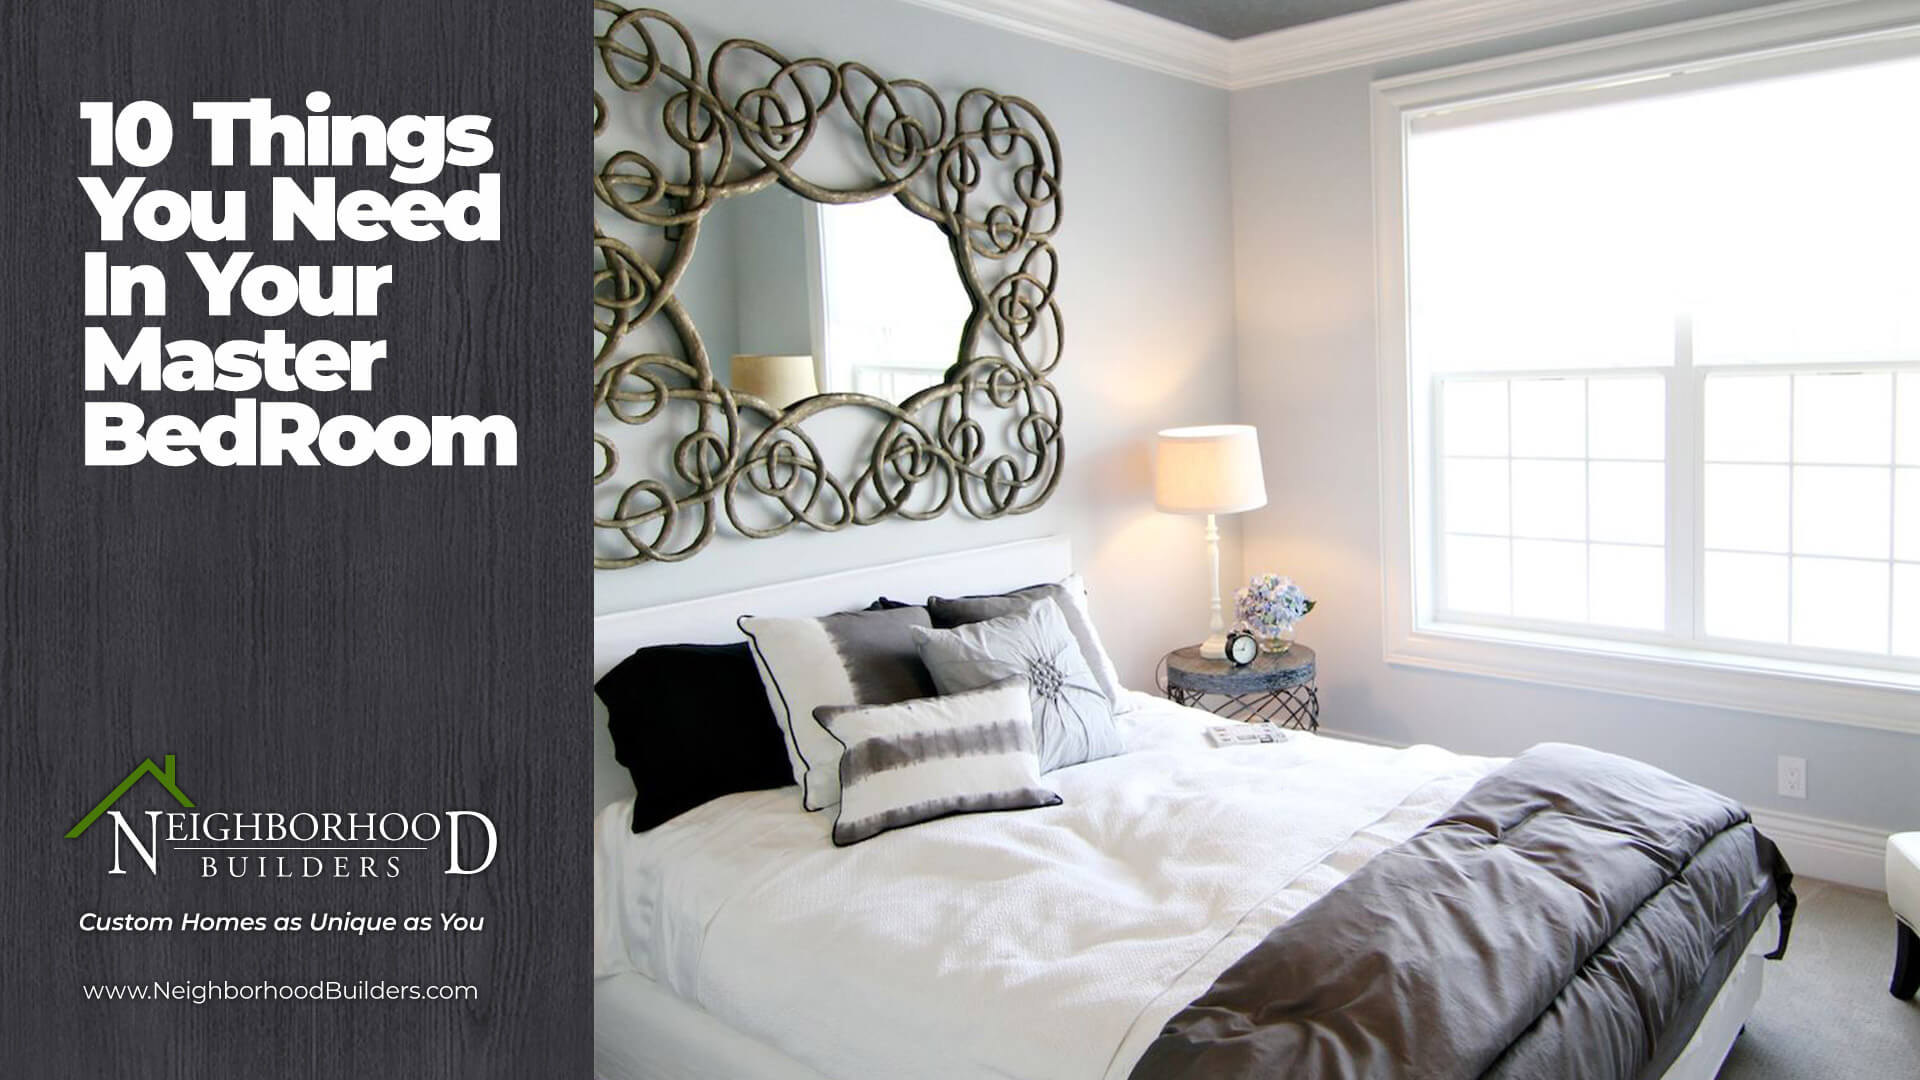 10 Things You Need in Your Master Bedroom